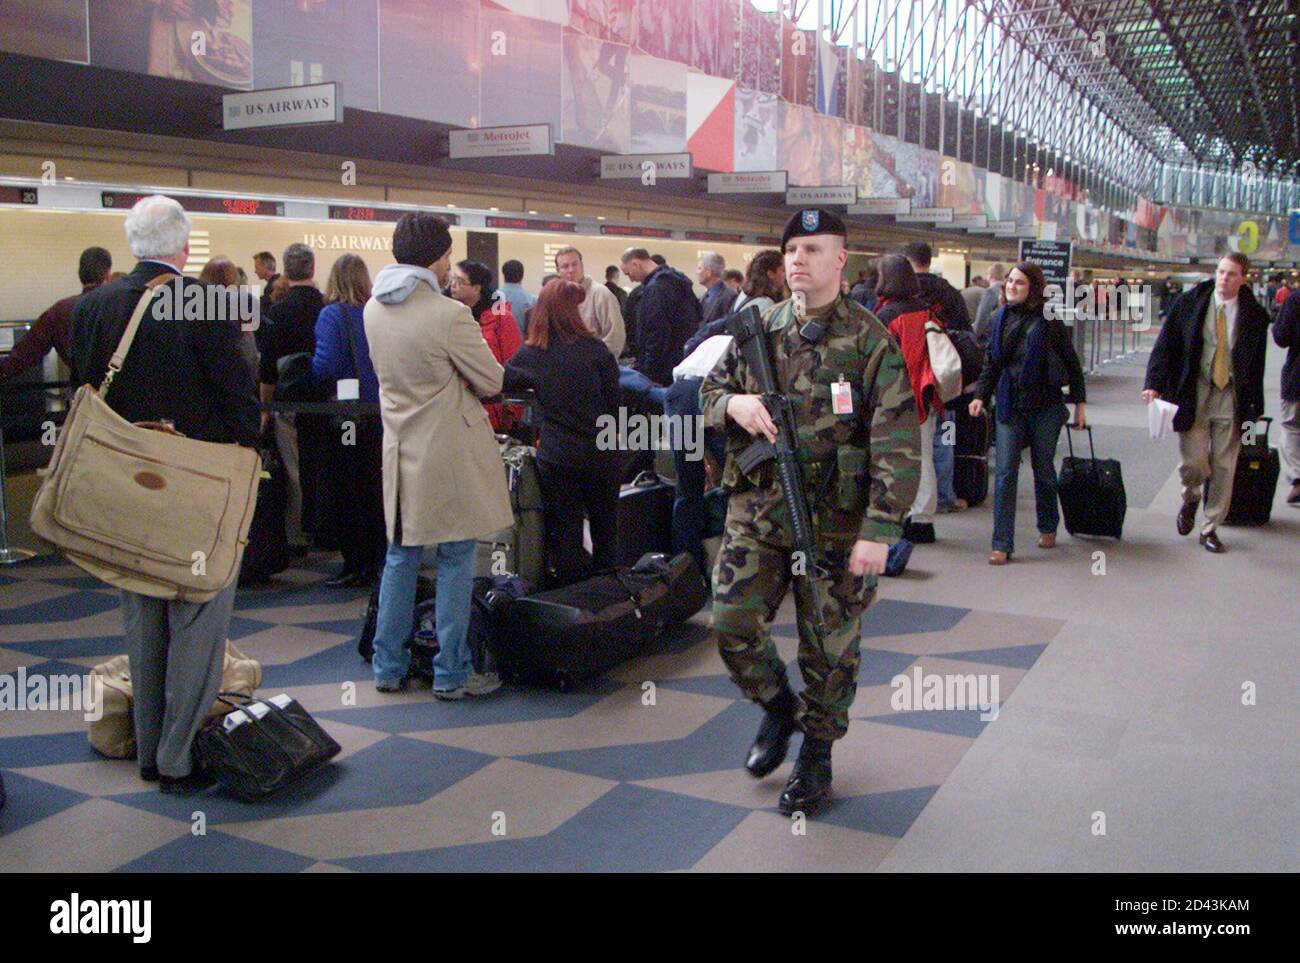 A member of the National Guard patrols the Southwest Airlines ticket counter area at BWI Airport after a potential security breech occured at the Southwest baggage screening area at Terminal B February 7, 2002. The Federal Aviation Administration (FAA) ordered the concourse evacuated and examined by security officials with dogs before it was reopened an hour later. Over 1,500 passengers had to leave the area and then wait in line to get re-screened for their flights. REUTERS/Joe Giza  JG/GN Stock Photo